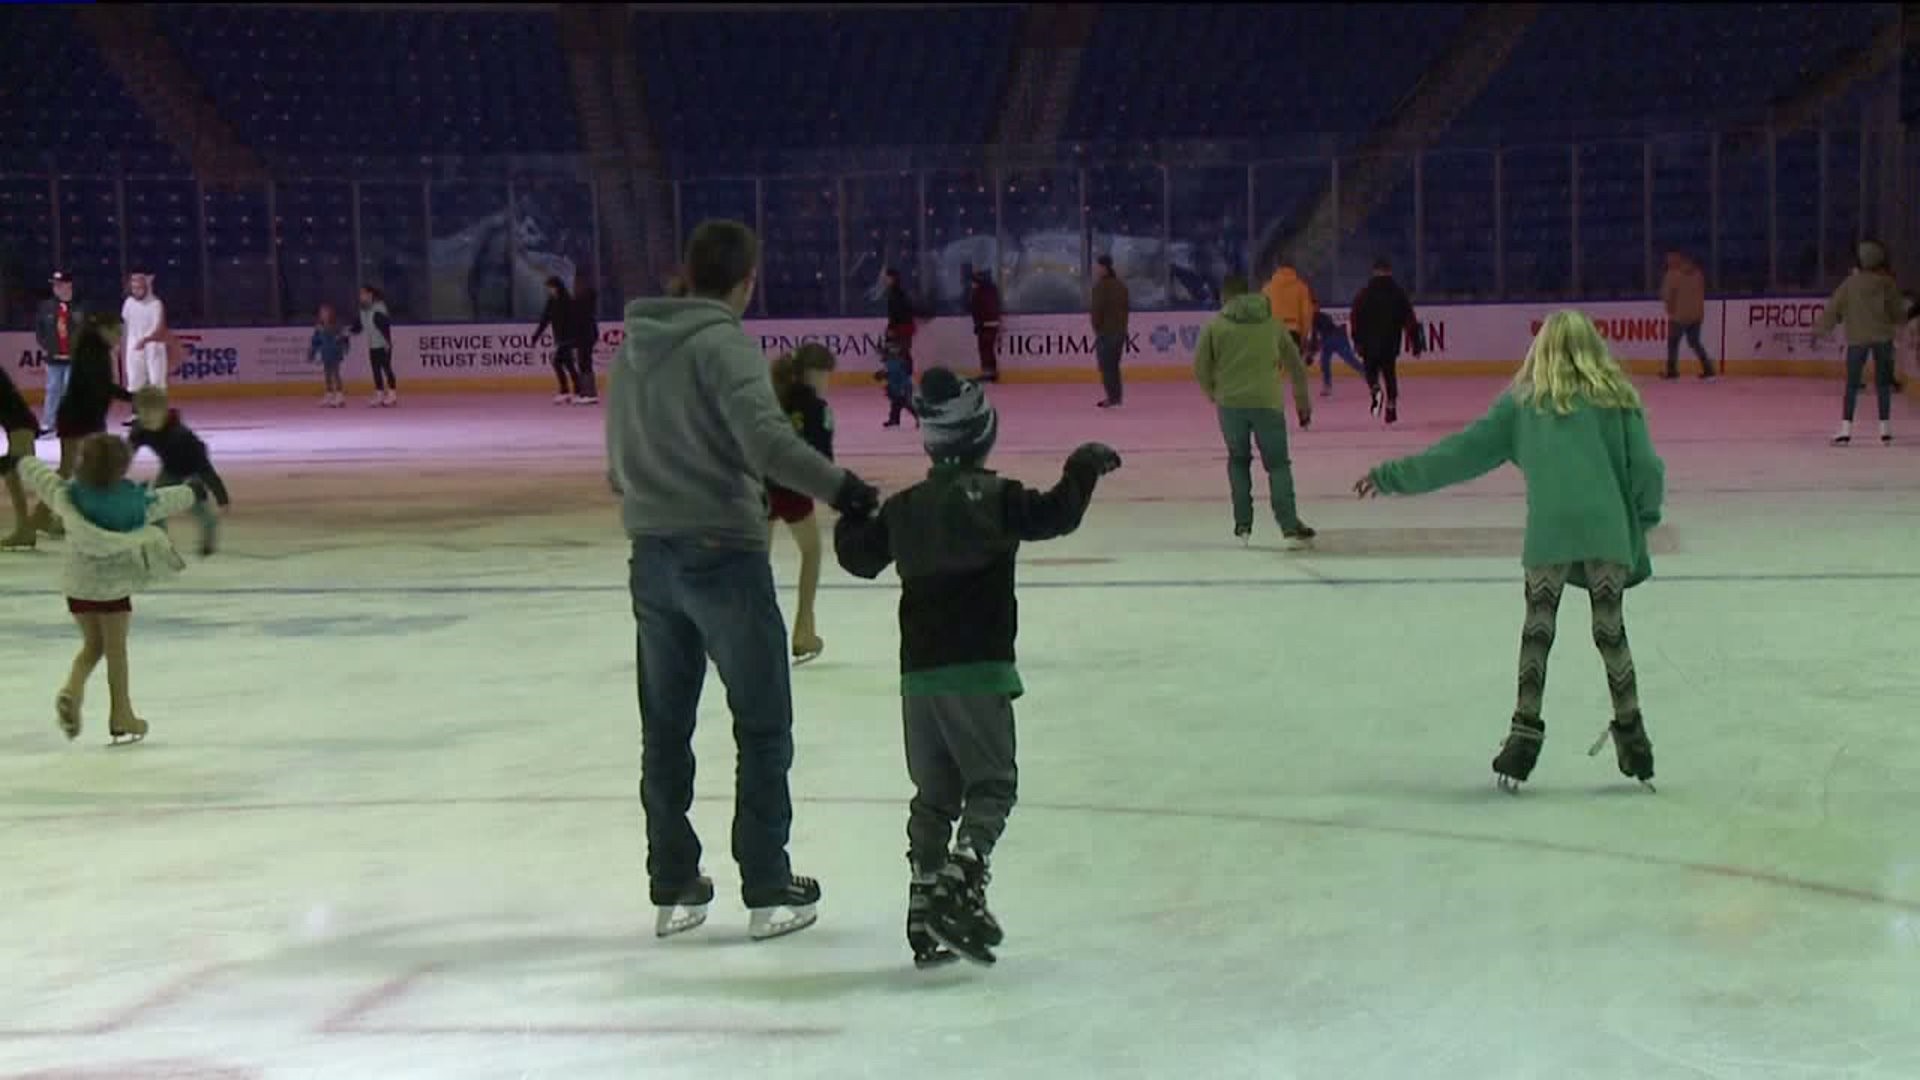 16th Annual Open Skate Benefits Toys for Tots